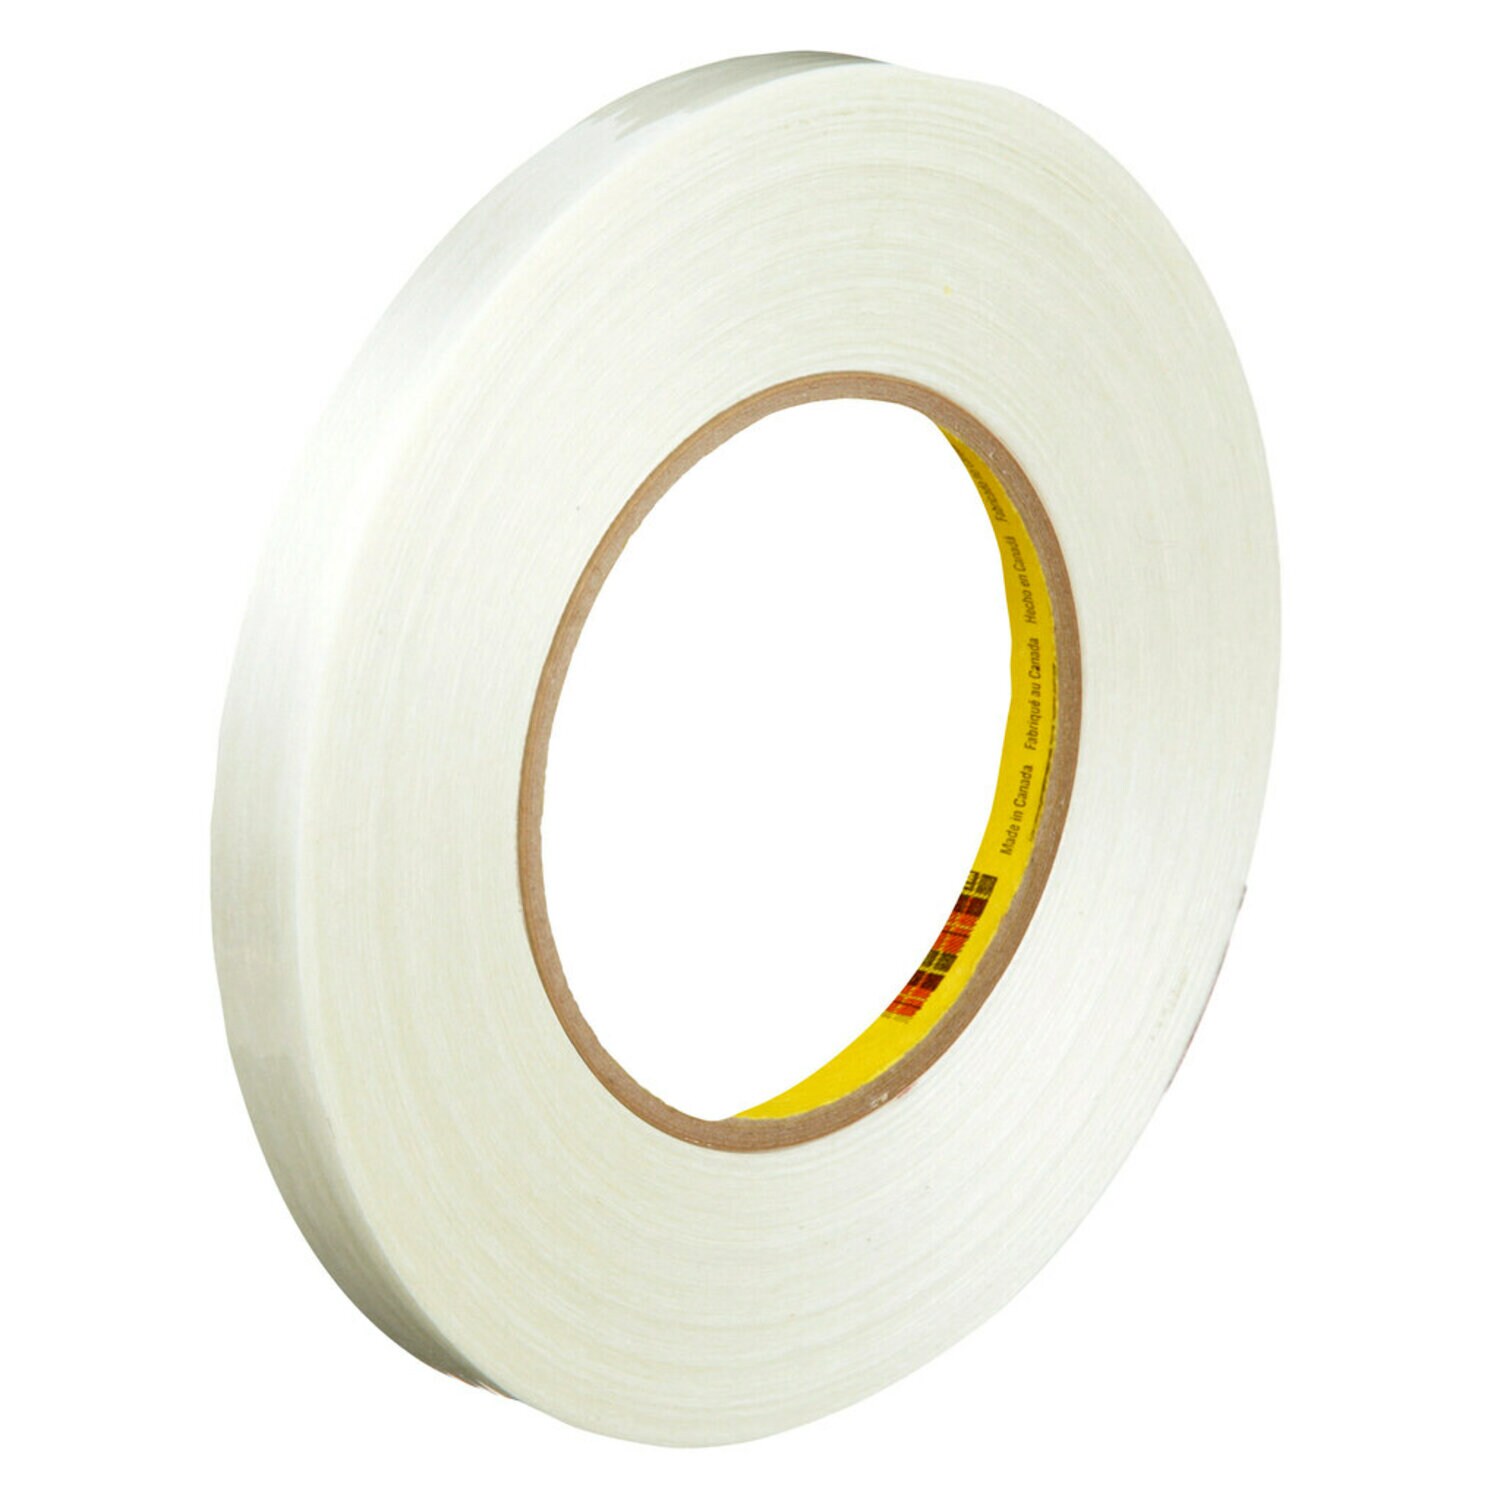 Scotch Double Sided Removable Tape, 1/2 in x 300 in (2002-CFT)